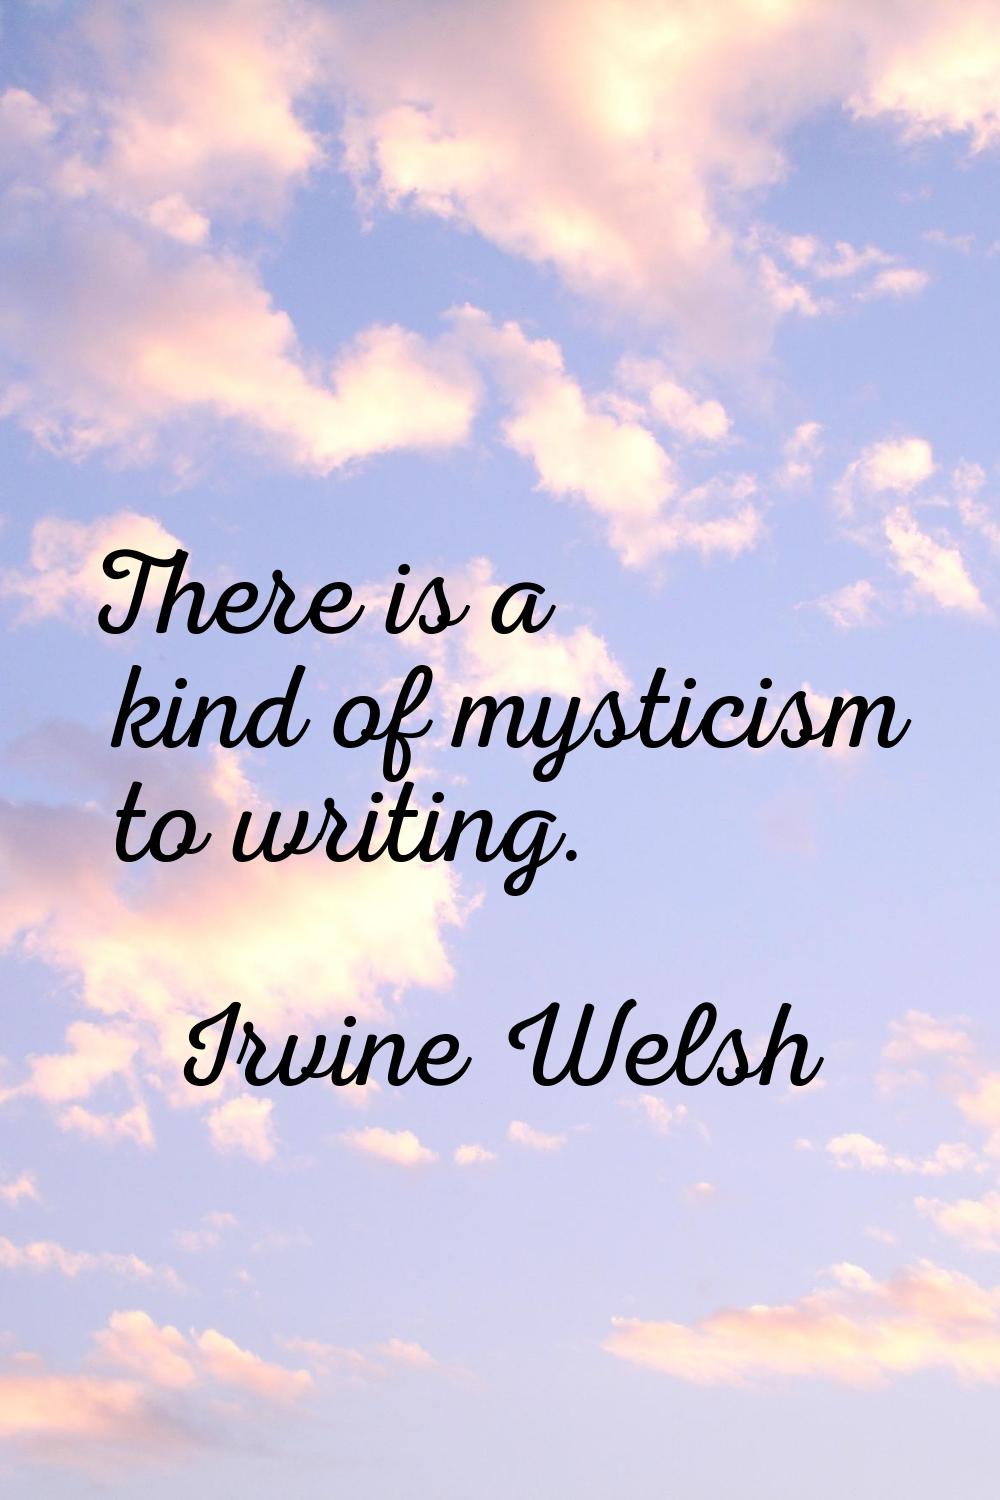 There is a kind of mysticism to writing.